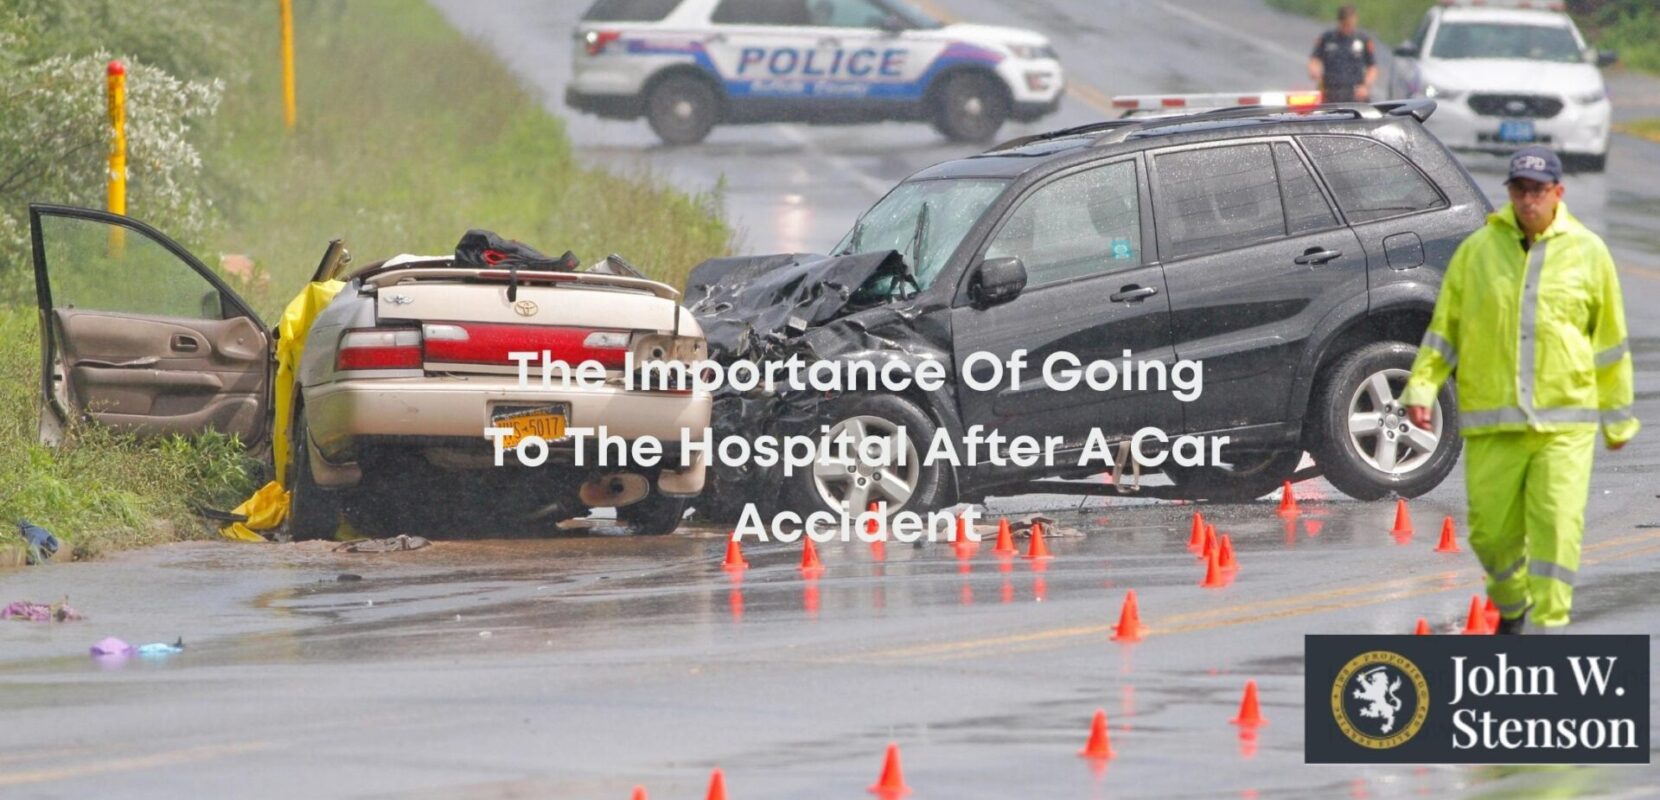 The Importance Of Going To The Hospital After A Car Accident